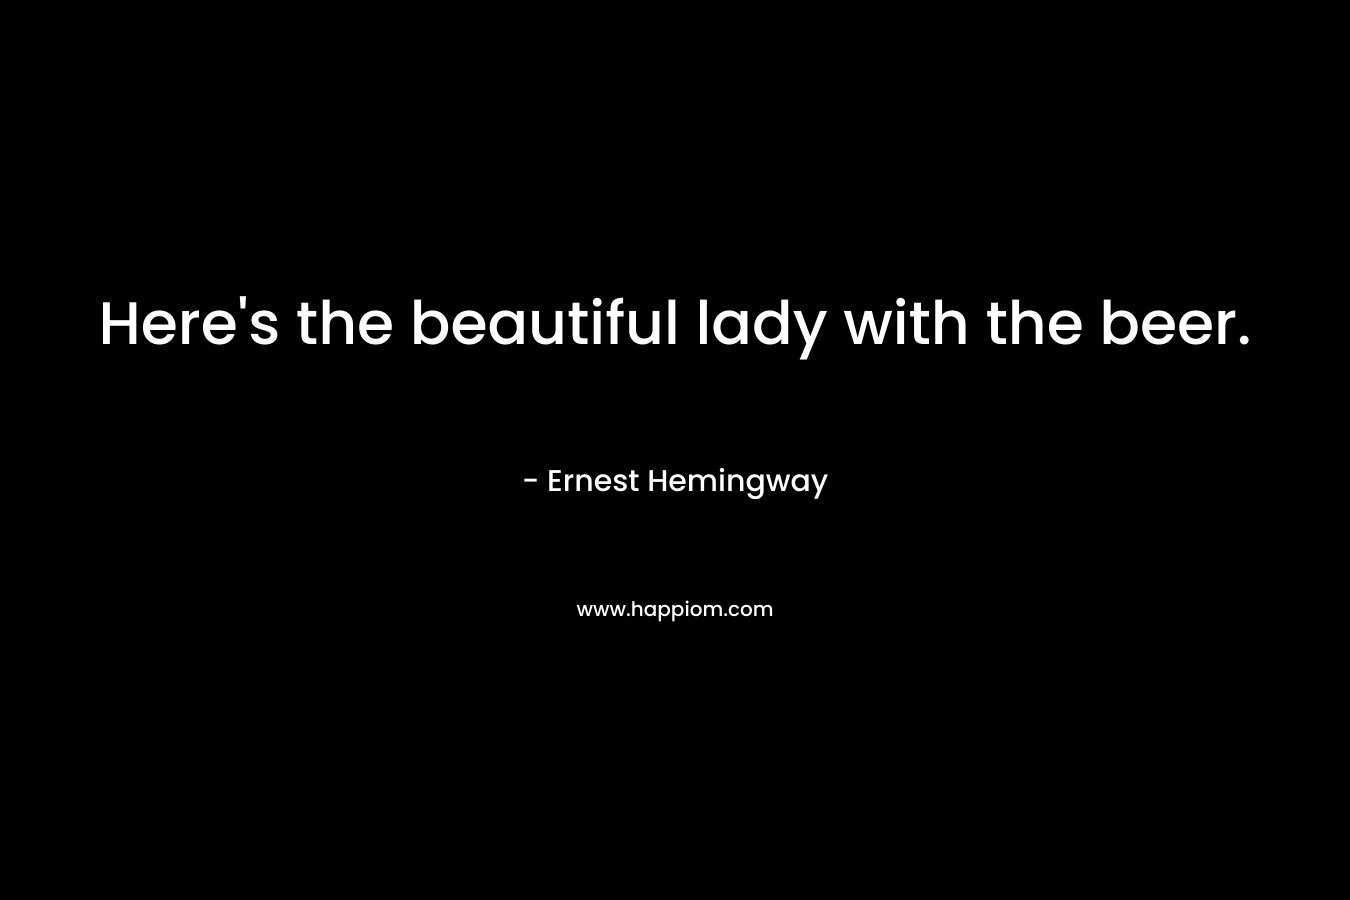 Here’s the beautiful lady with the beer. – Ernest Hemingway